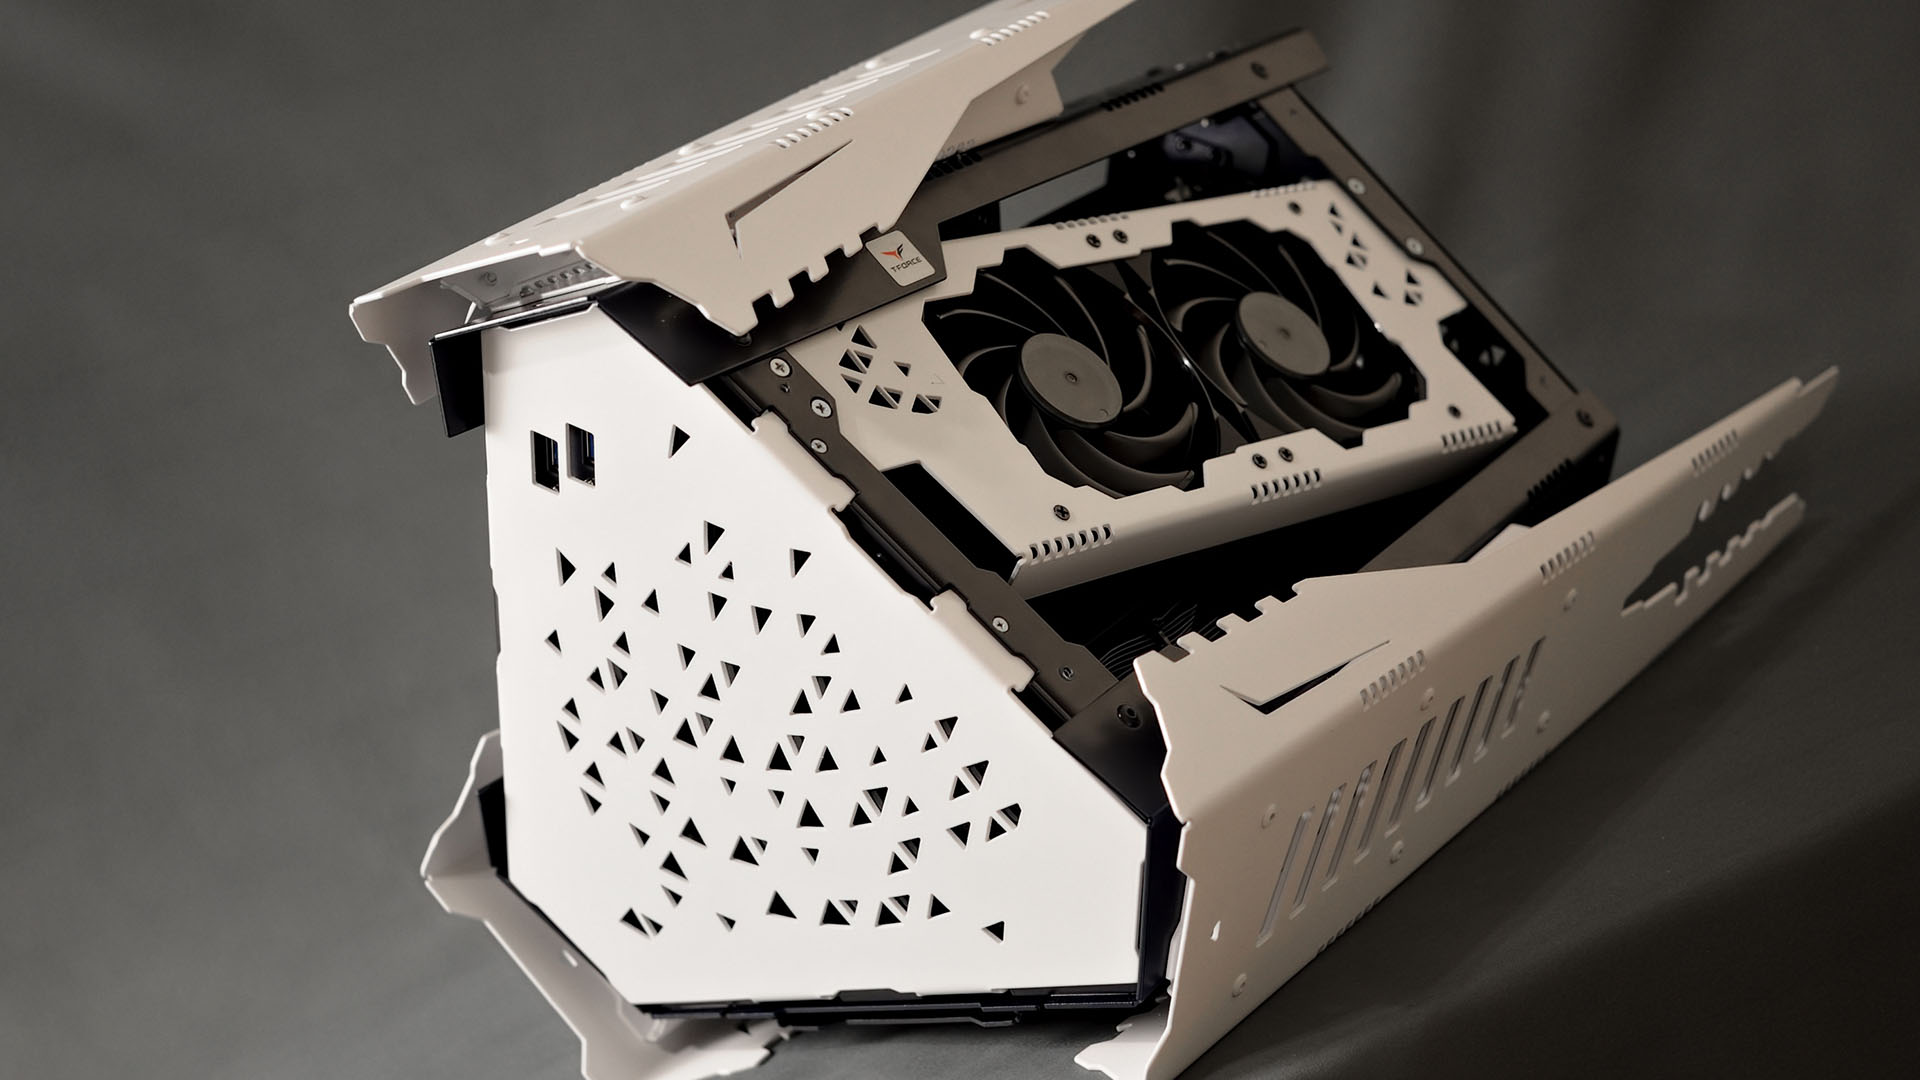 The white graphics card sitting inside the sputnik gaming pc case